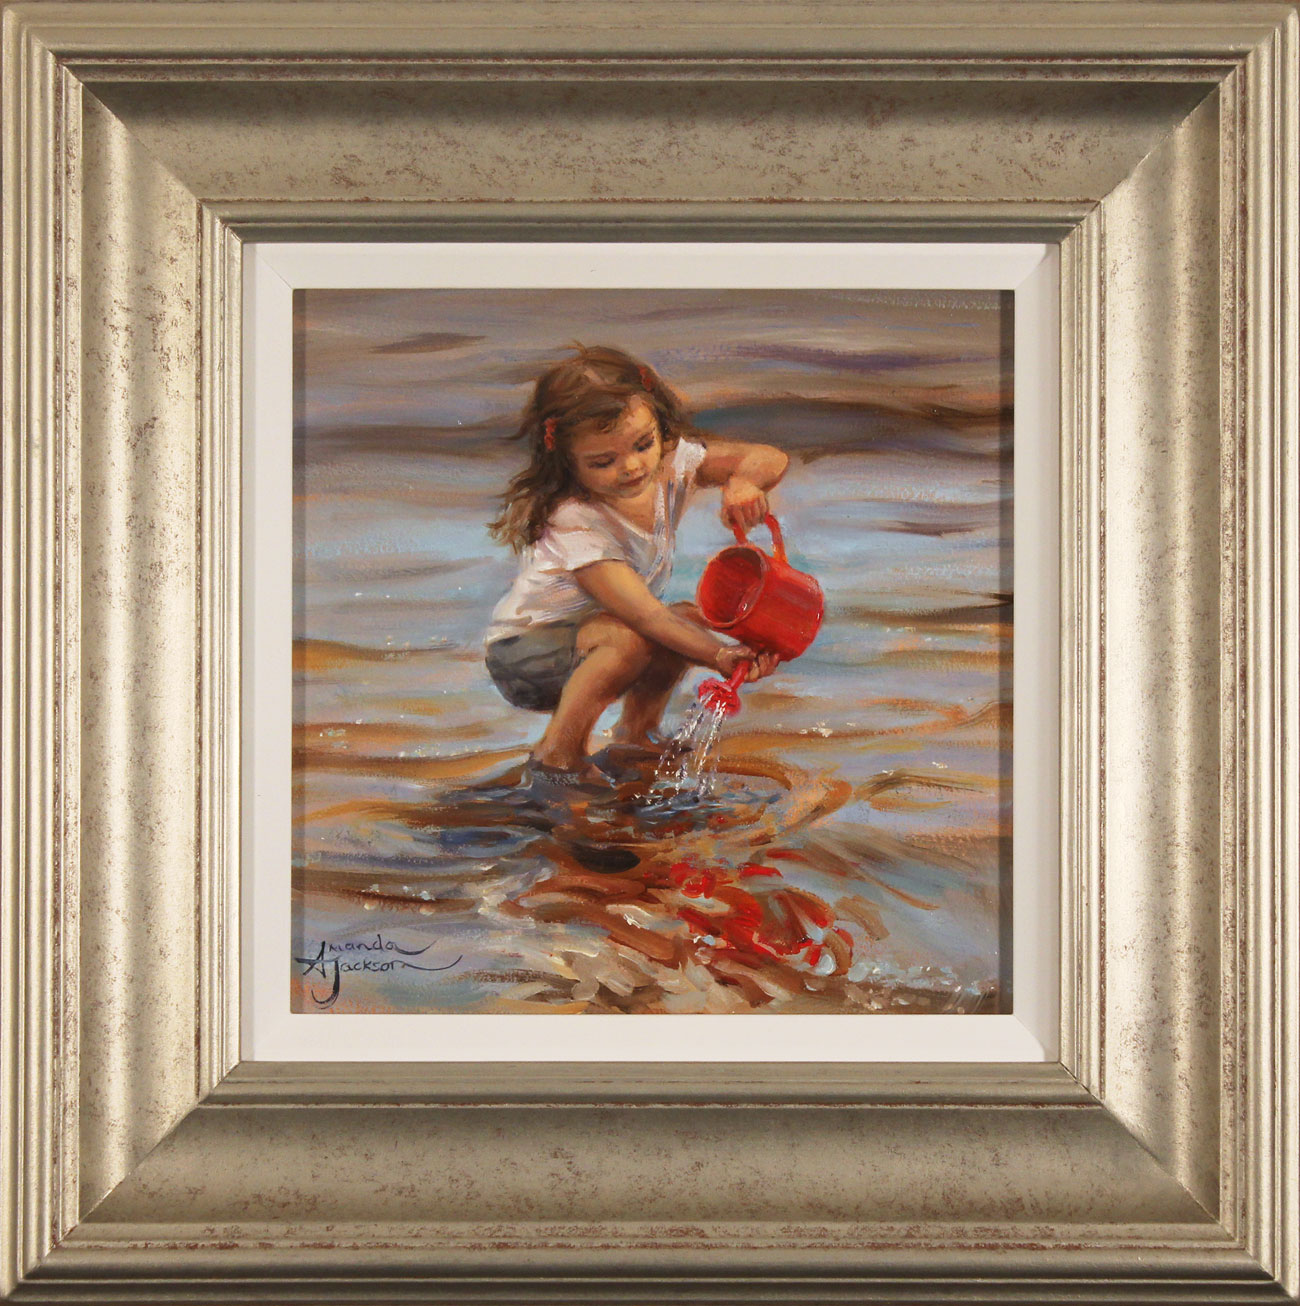 Amanda Jackson, Original oil painting on panel, The Red Watering Can